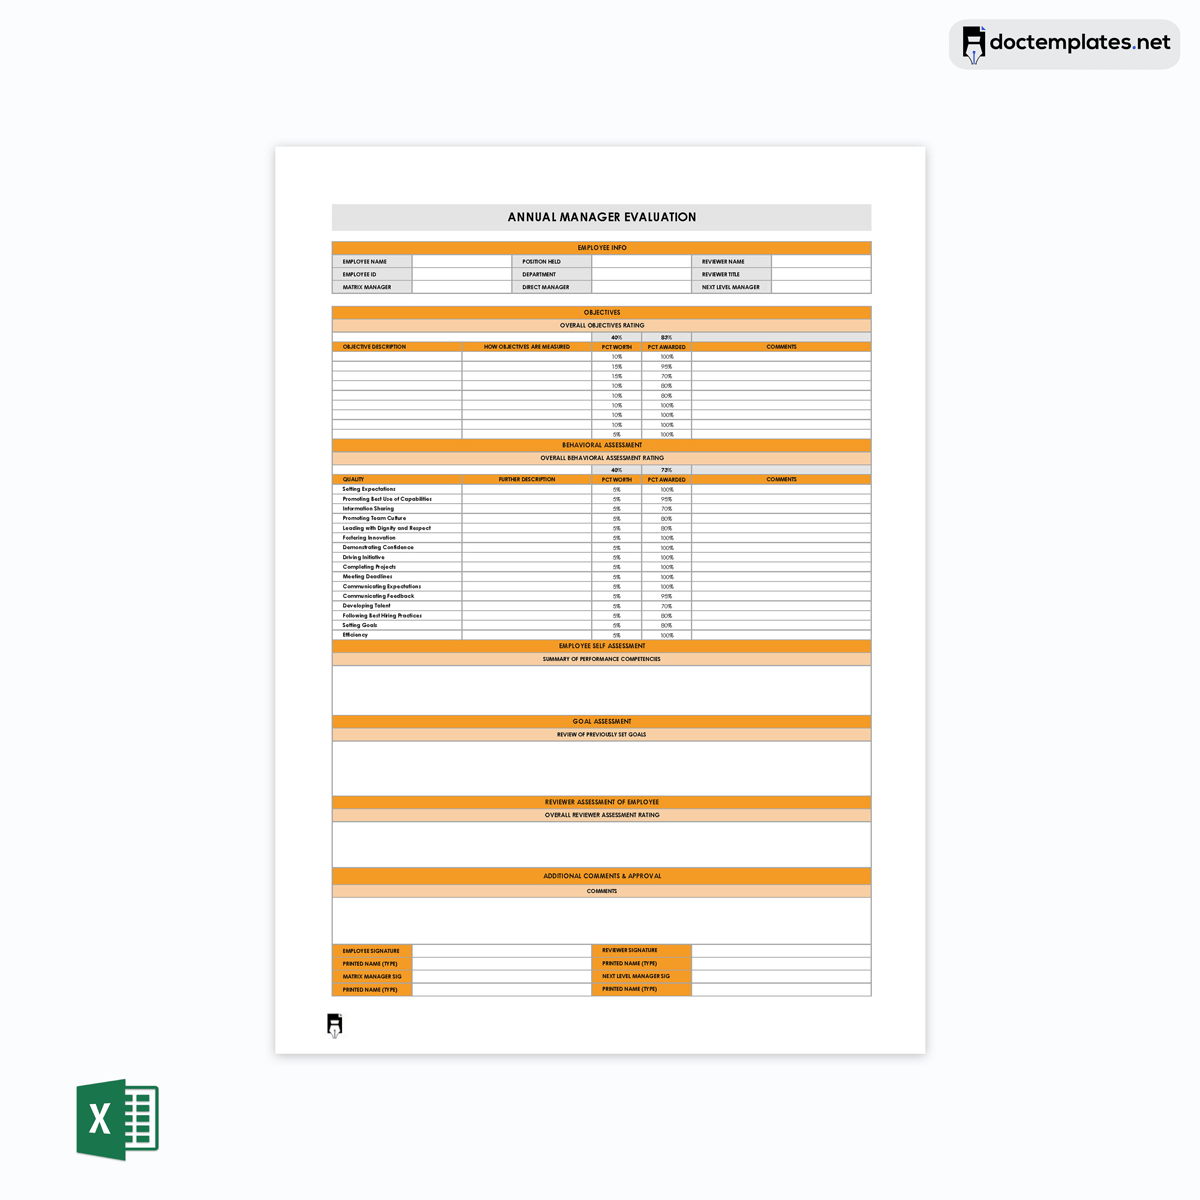 Performance feedback template in excel